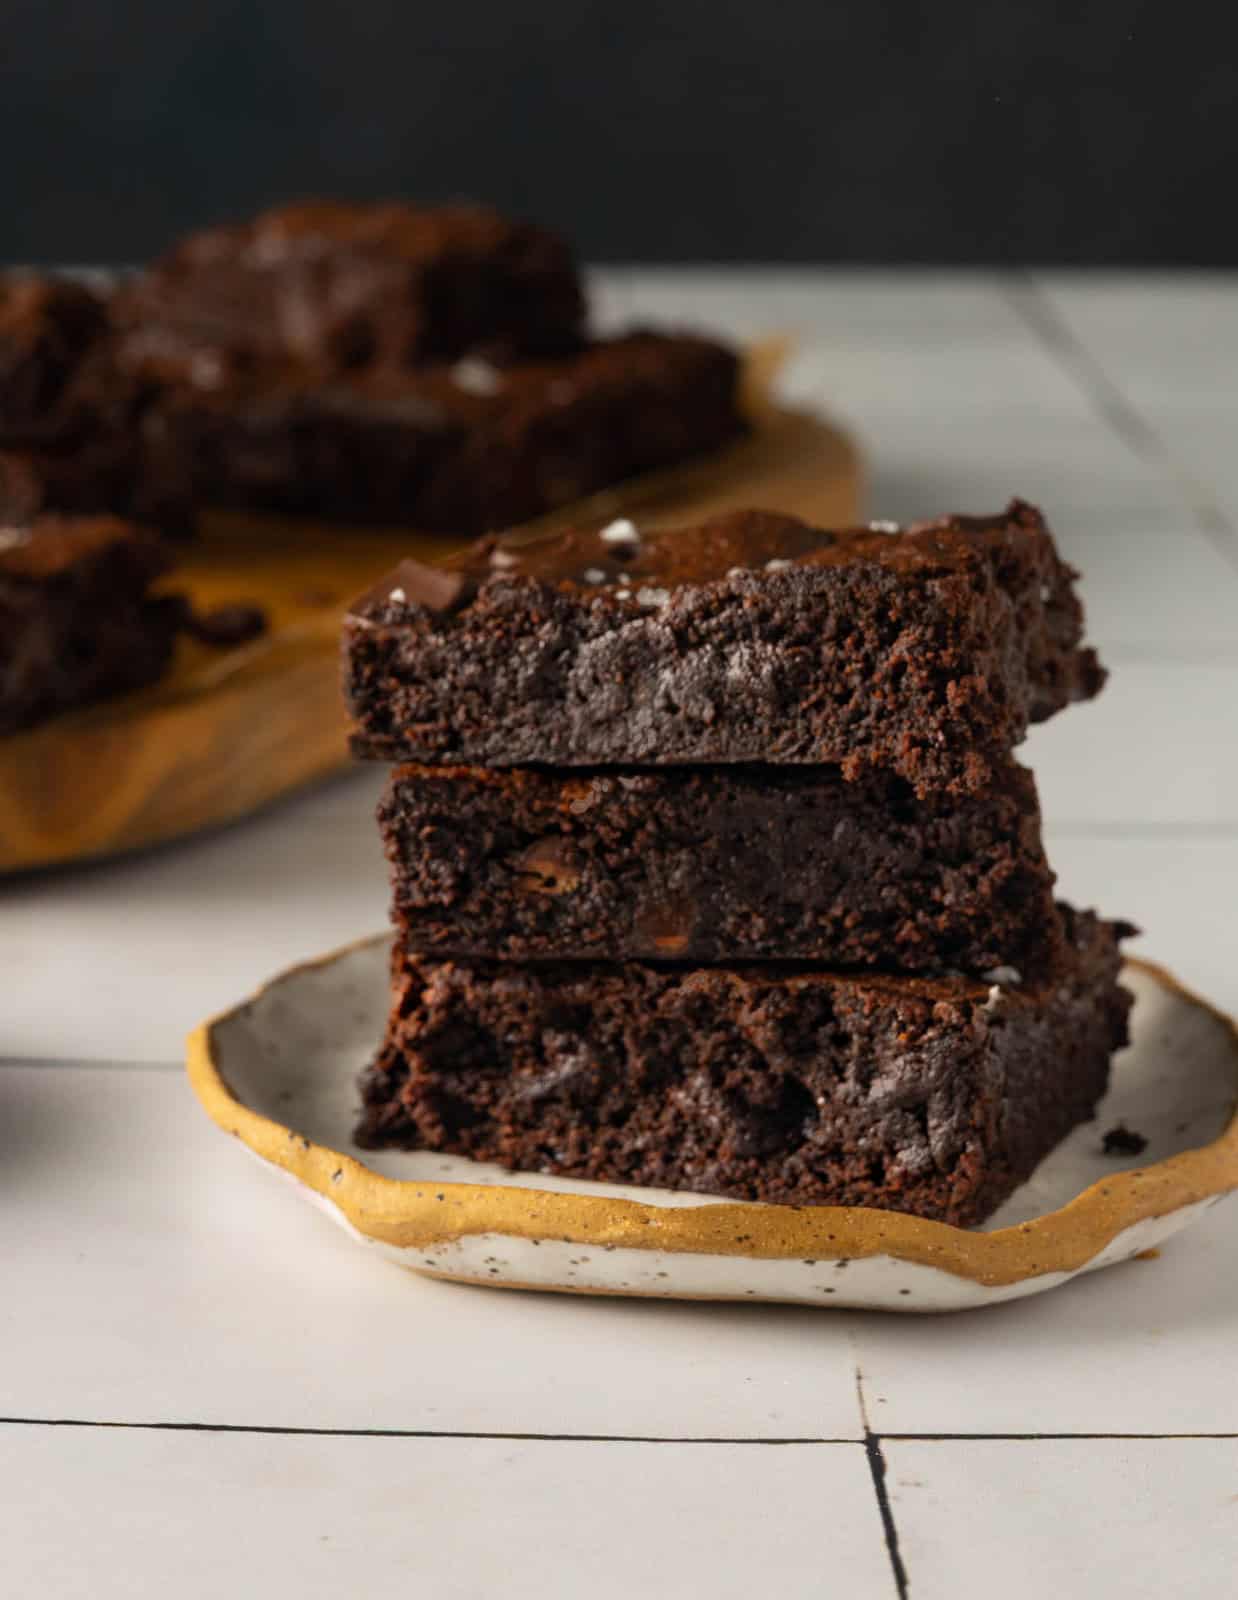 Final image of chocolate chunk brownies. There are three brownies stacked on a small dessert plate in front of a cutting board of brownies.